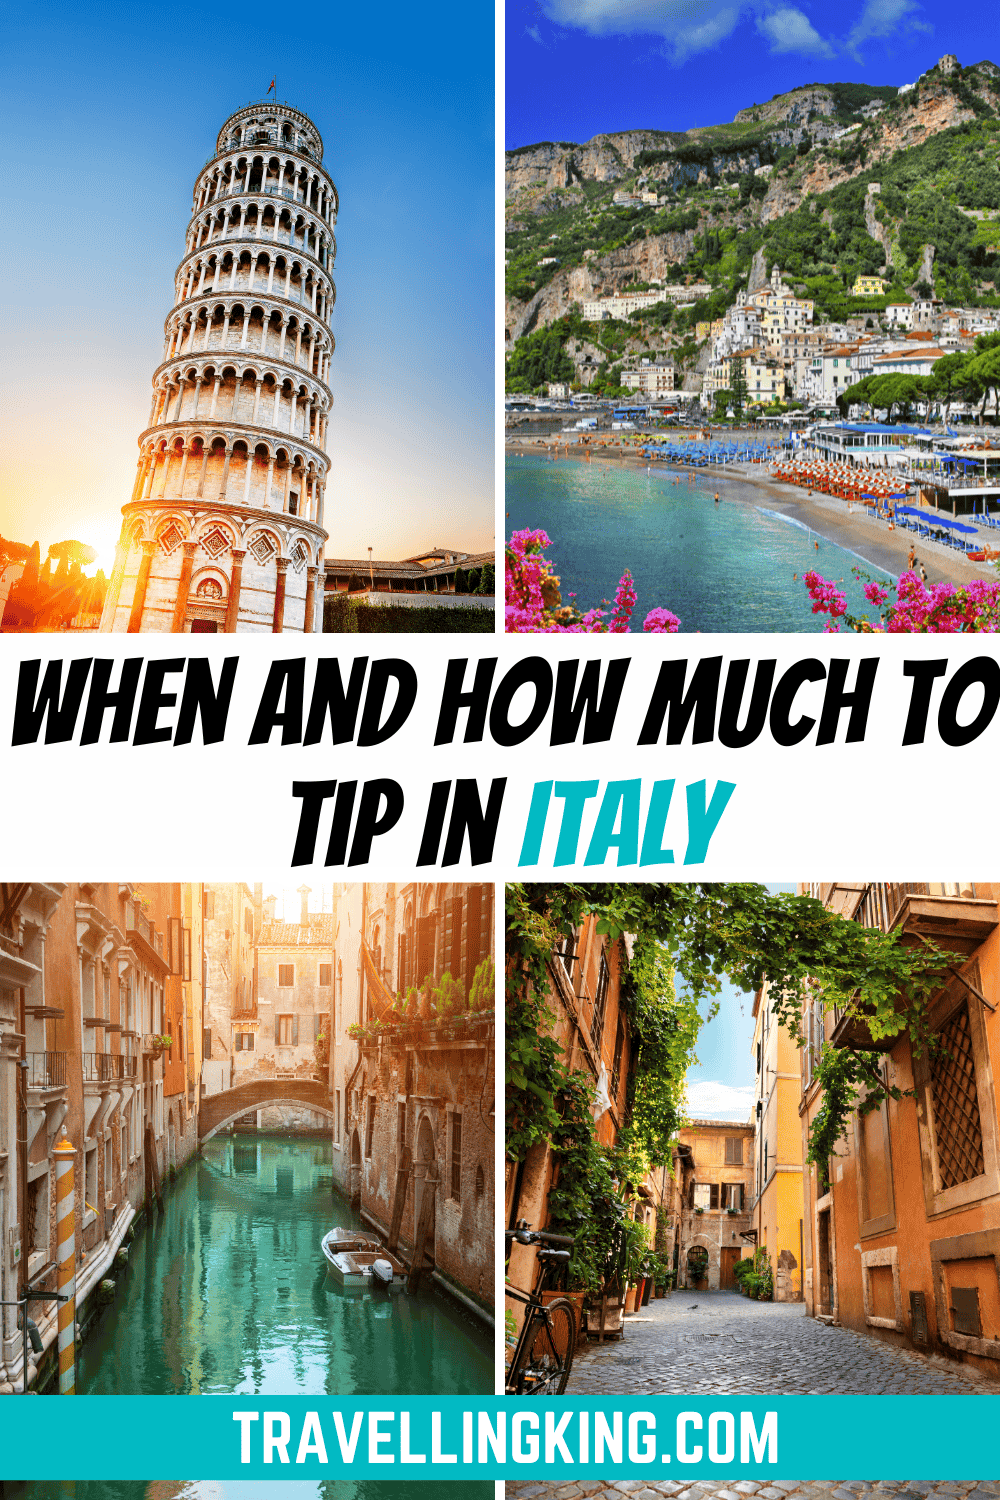 Tipping In Italy Guide | When And How Much To Tip In Italy